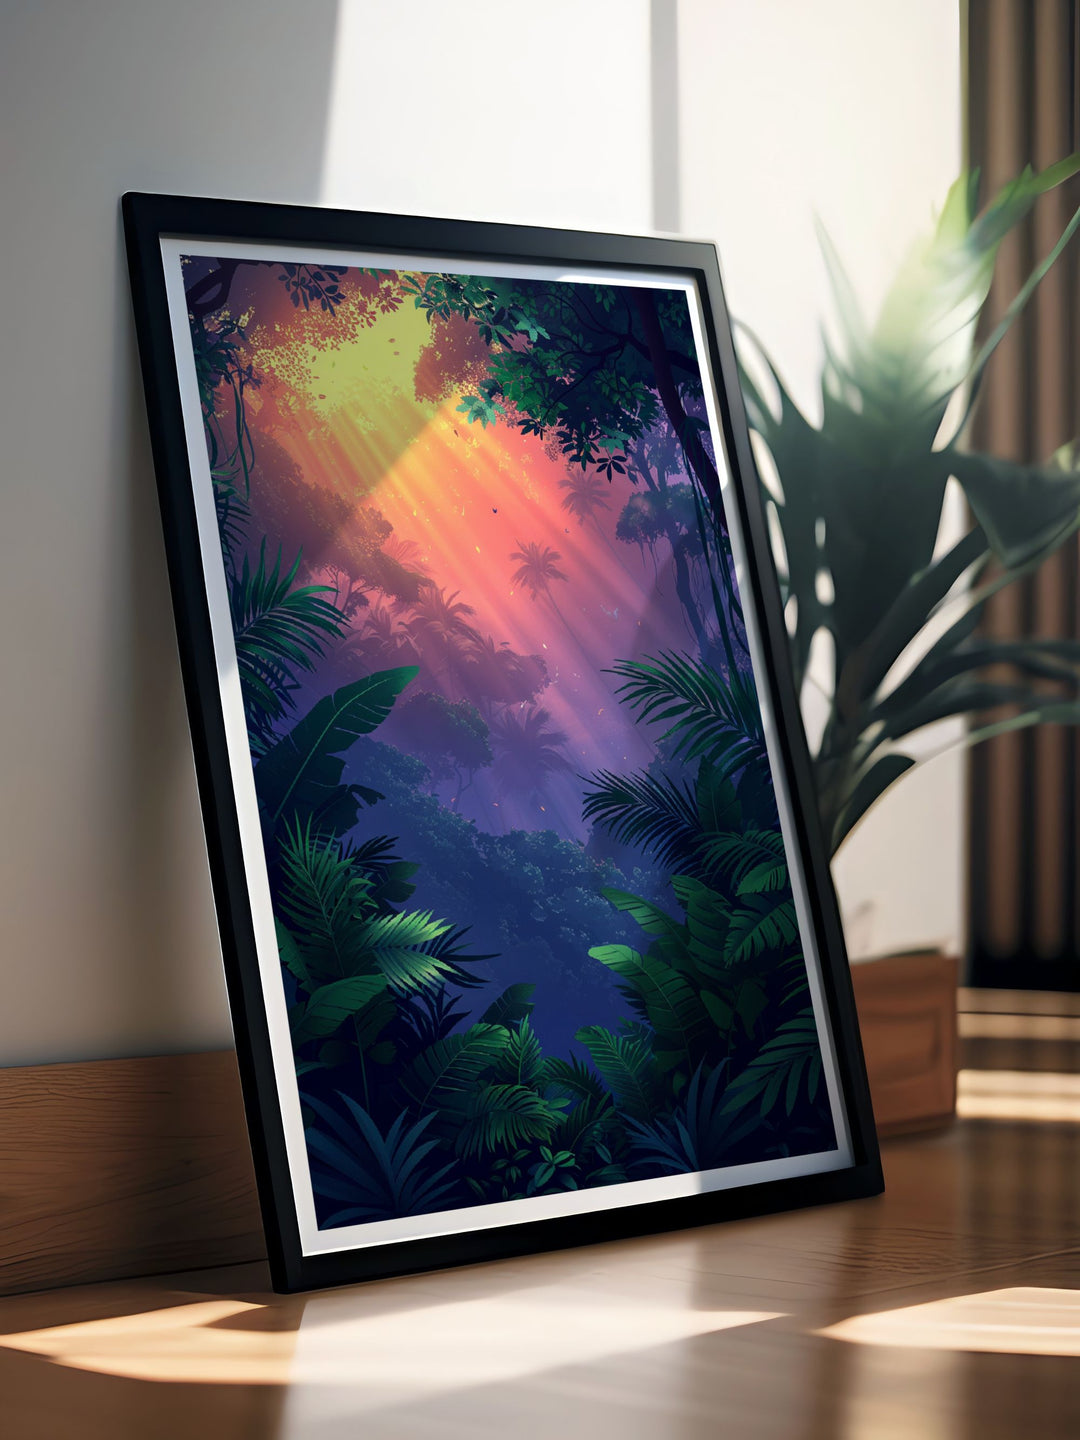 Framed art capturing the serene ambiance of a foggy forest, reflecting the beauty and tranquility of natures misty environments.